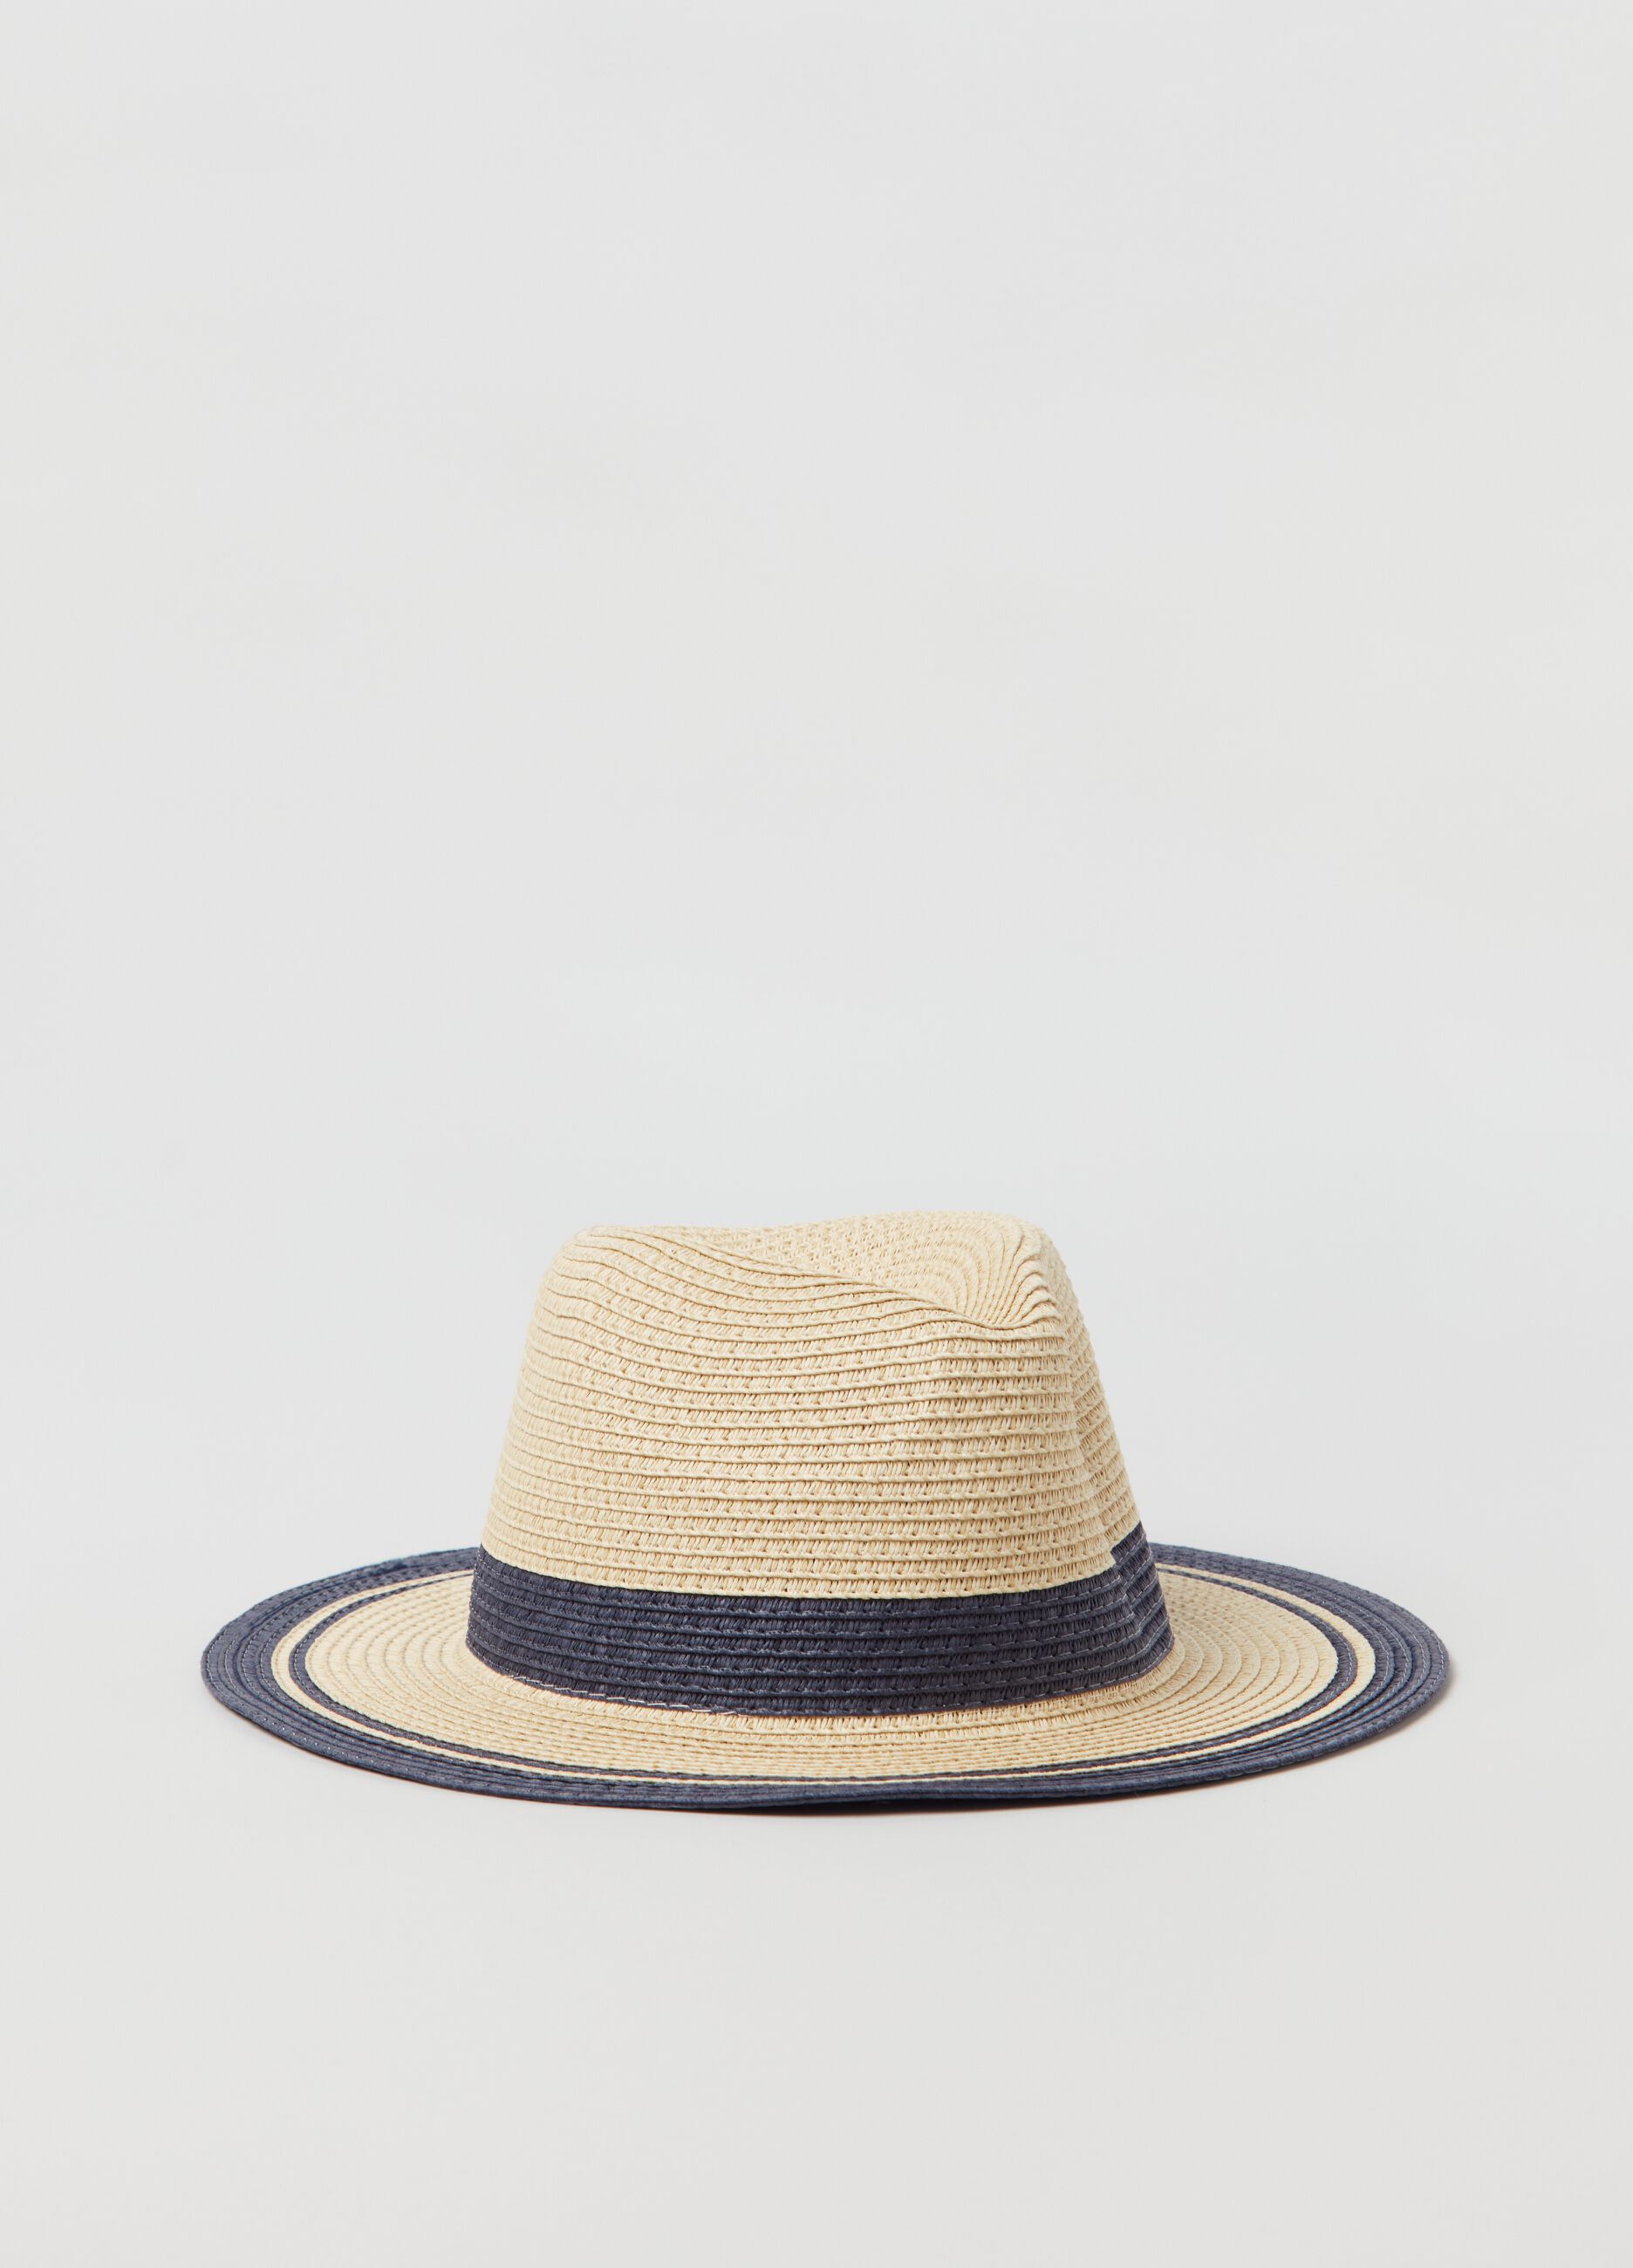 Straw hat with contrasting details